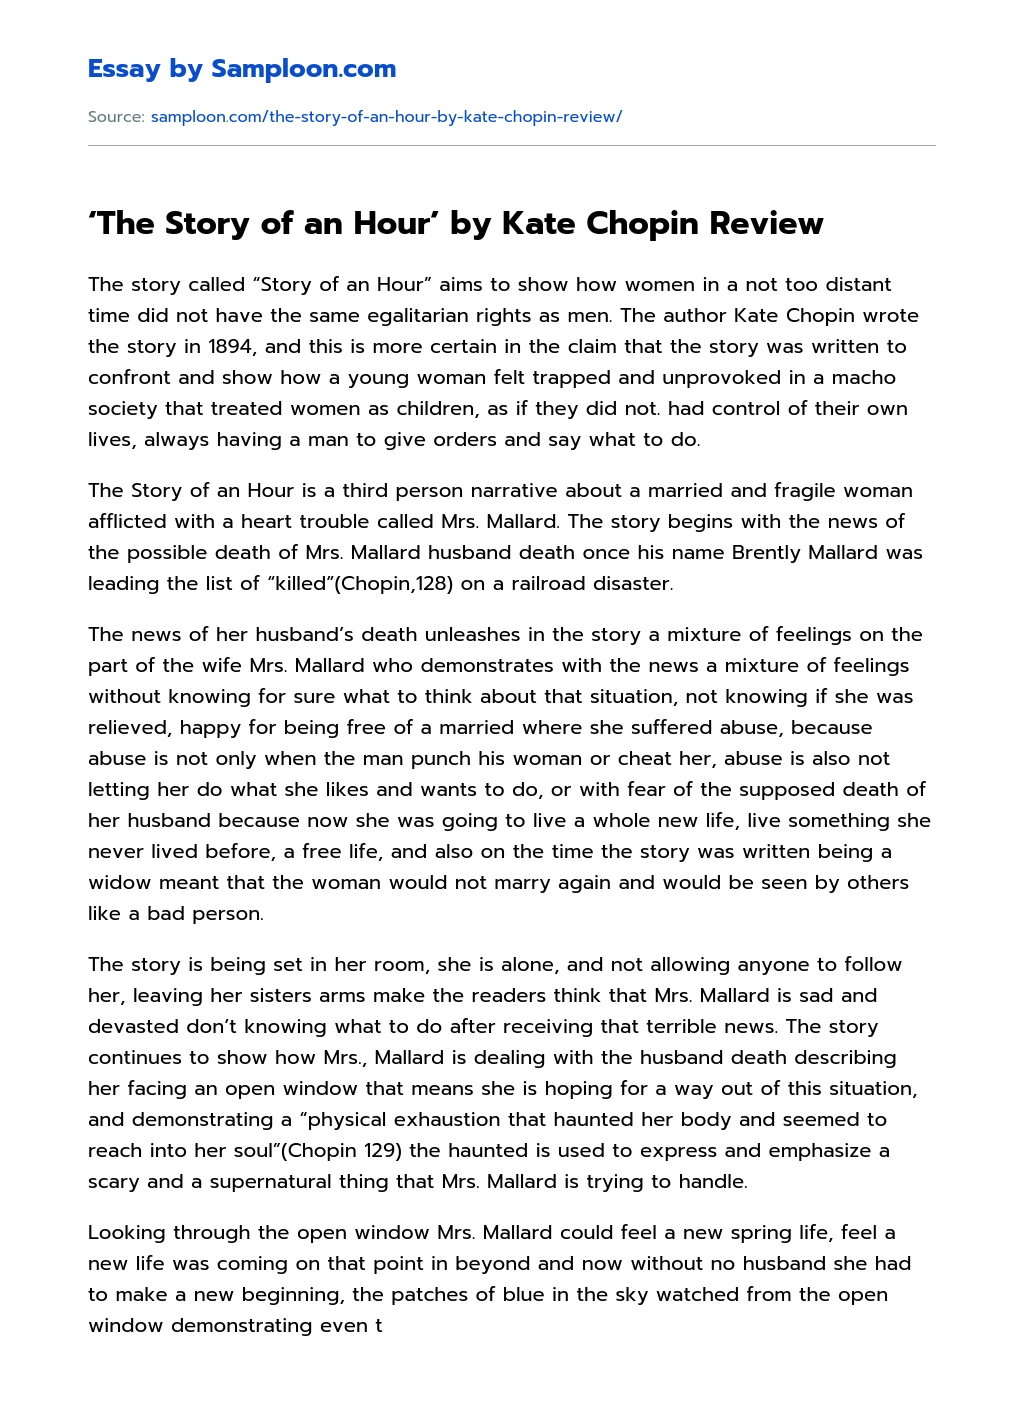 ‘The Story of an Hour’ by Kate Chopin Review essay